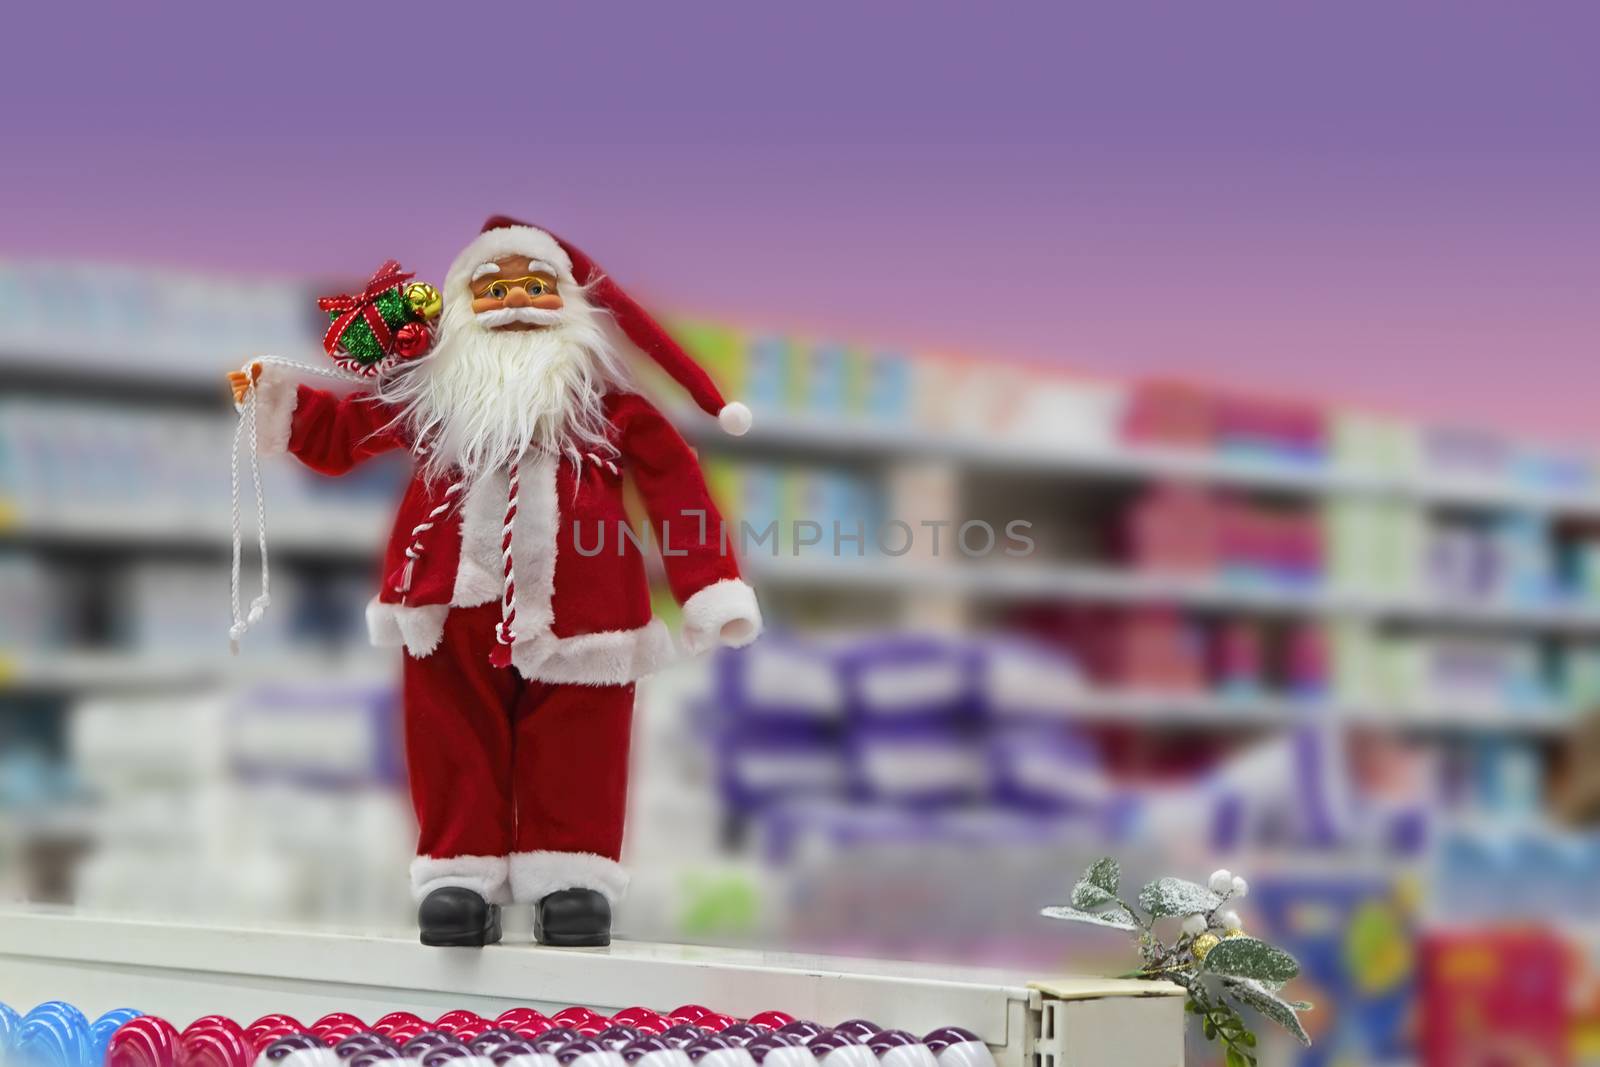 Toy Santa Claus is a festive Christmas decoration store by bonilook